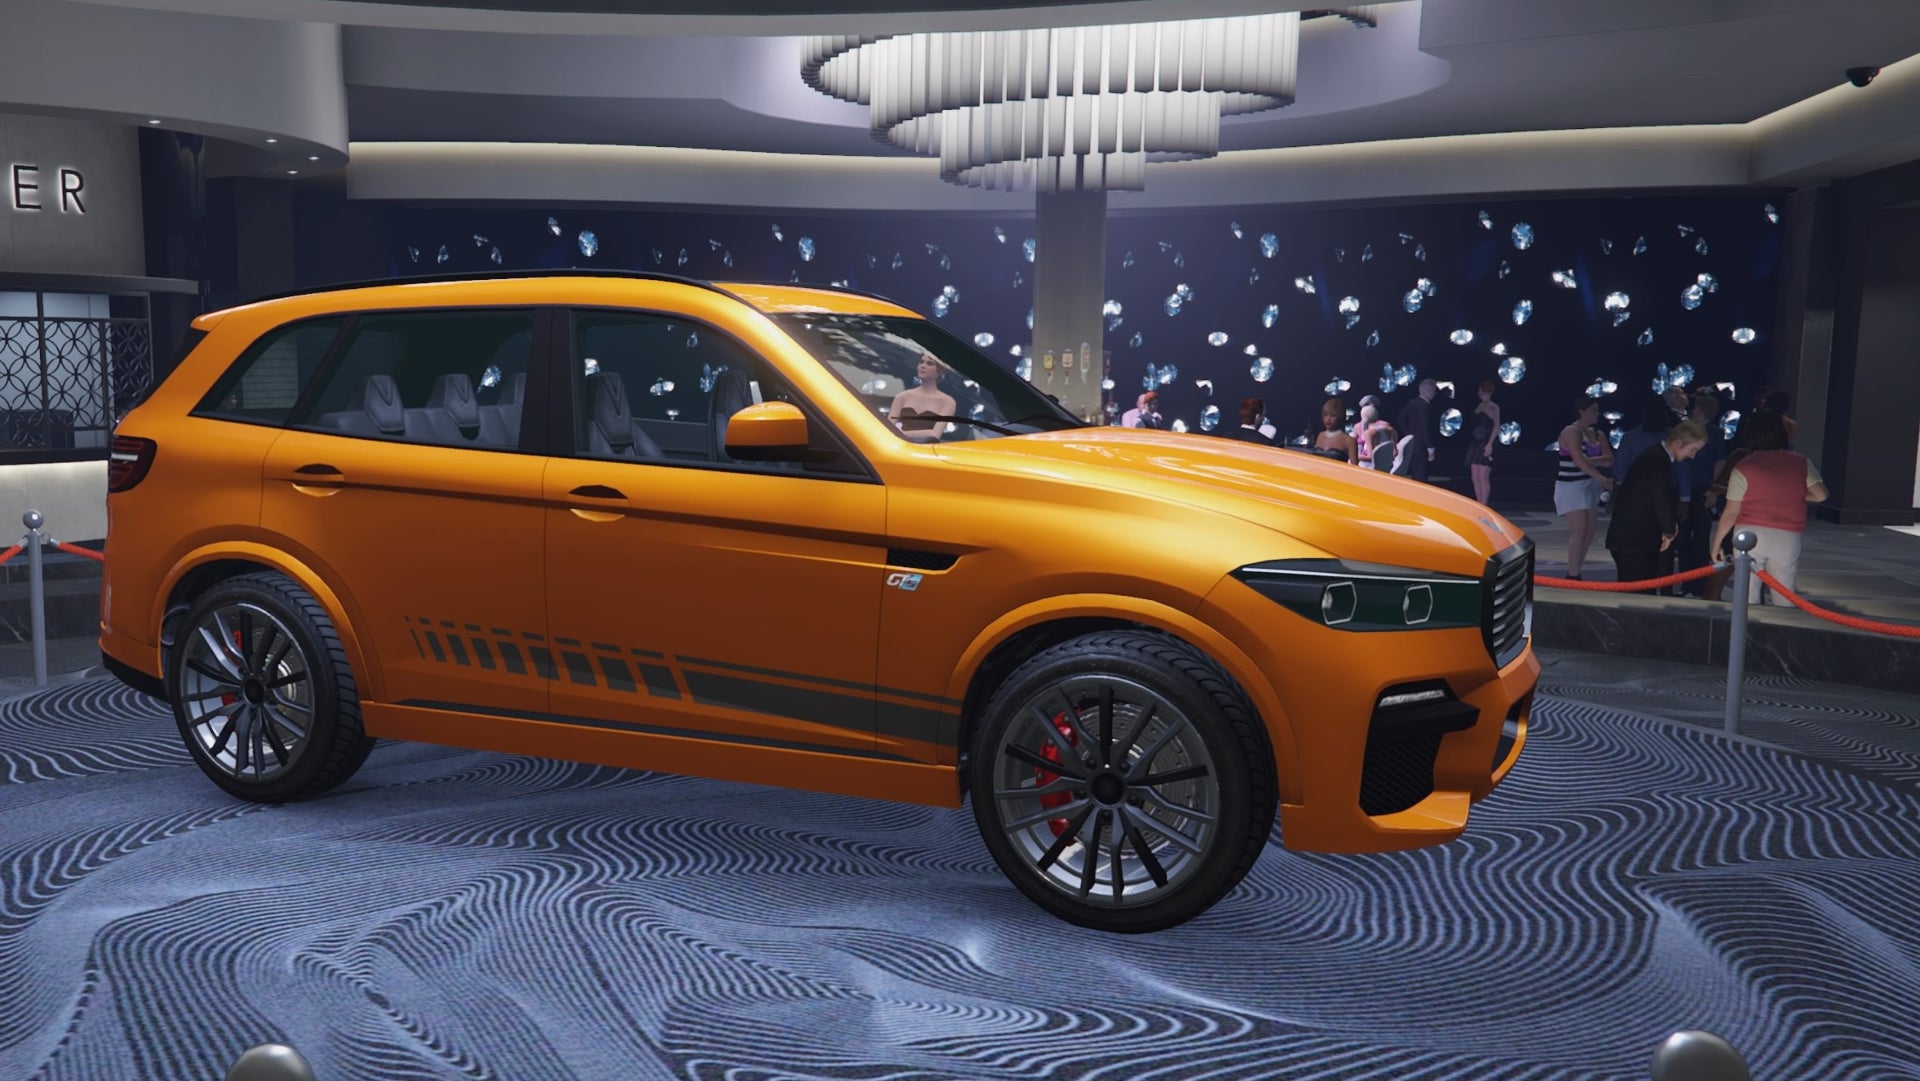 GTA Online, a side view of an Orange Rebla GTS vehicle parked on the podium in the middle of the Casino.